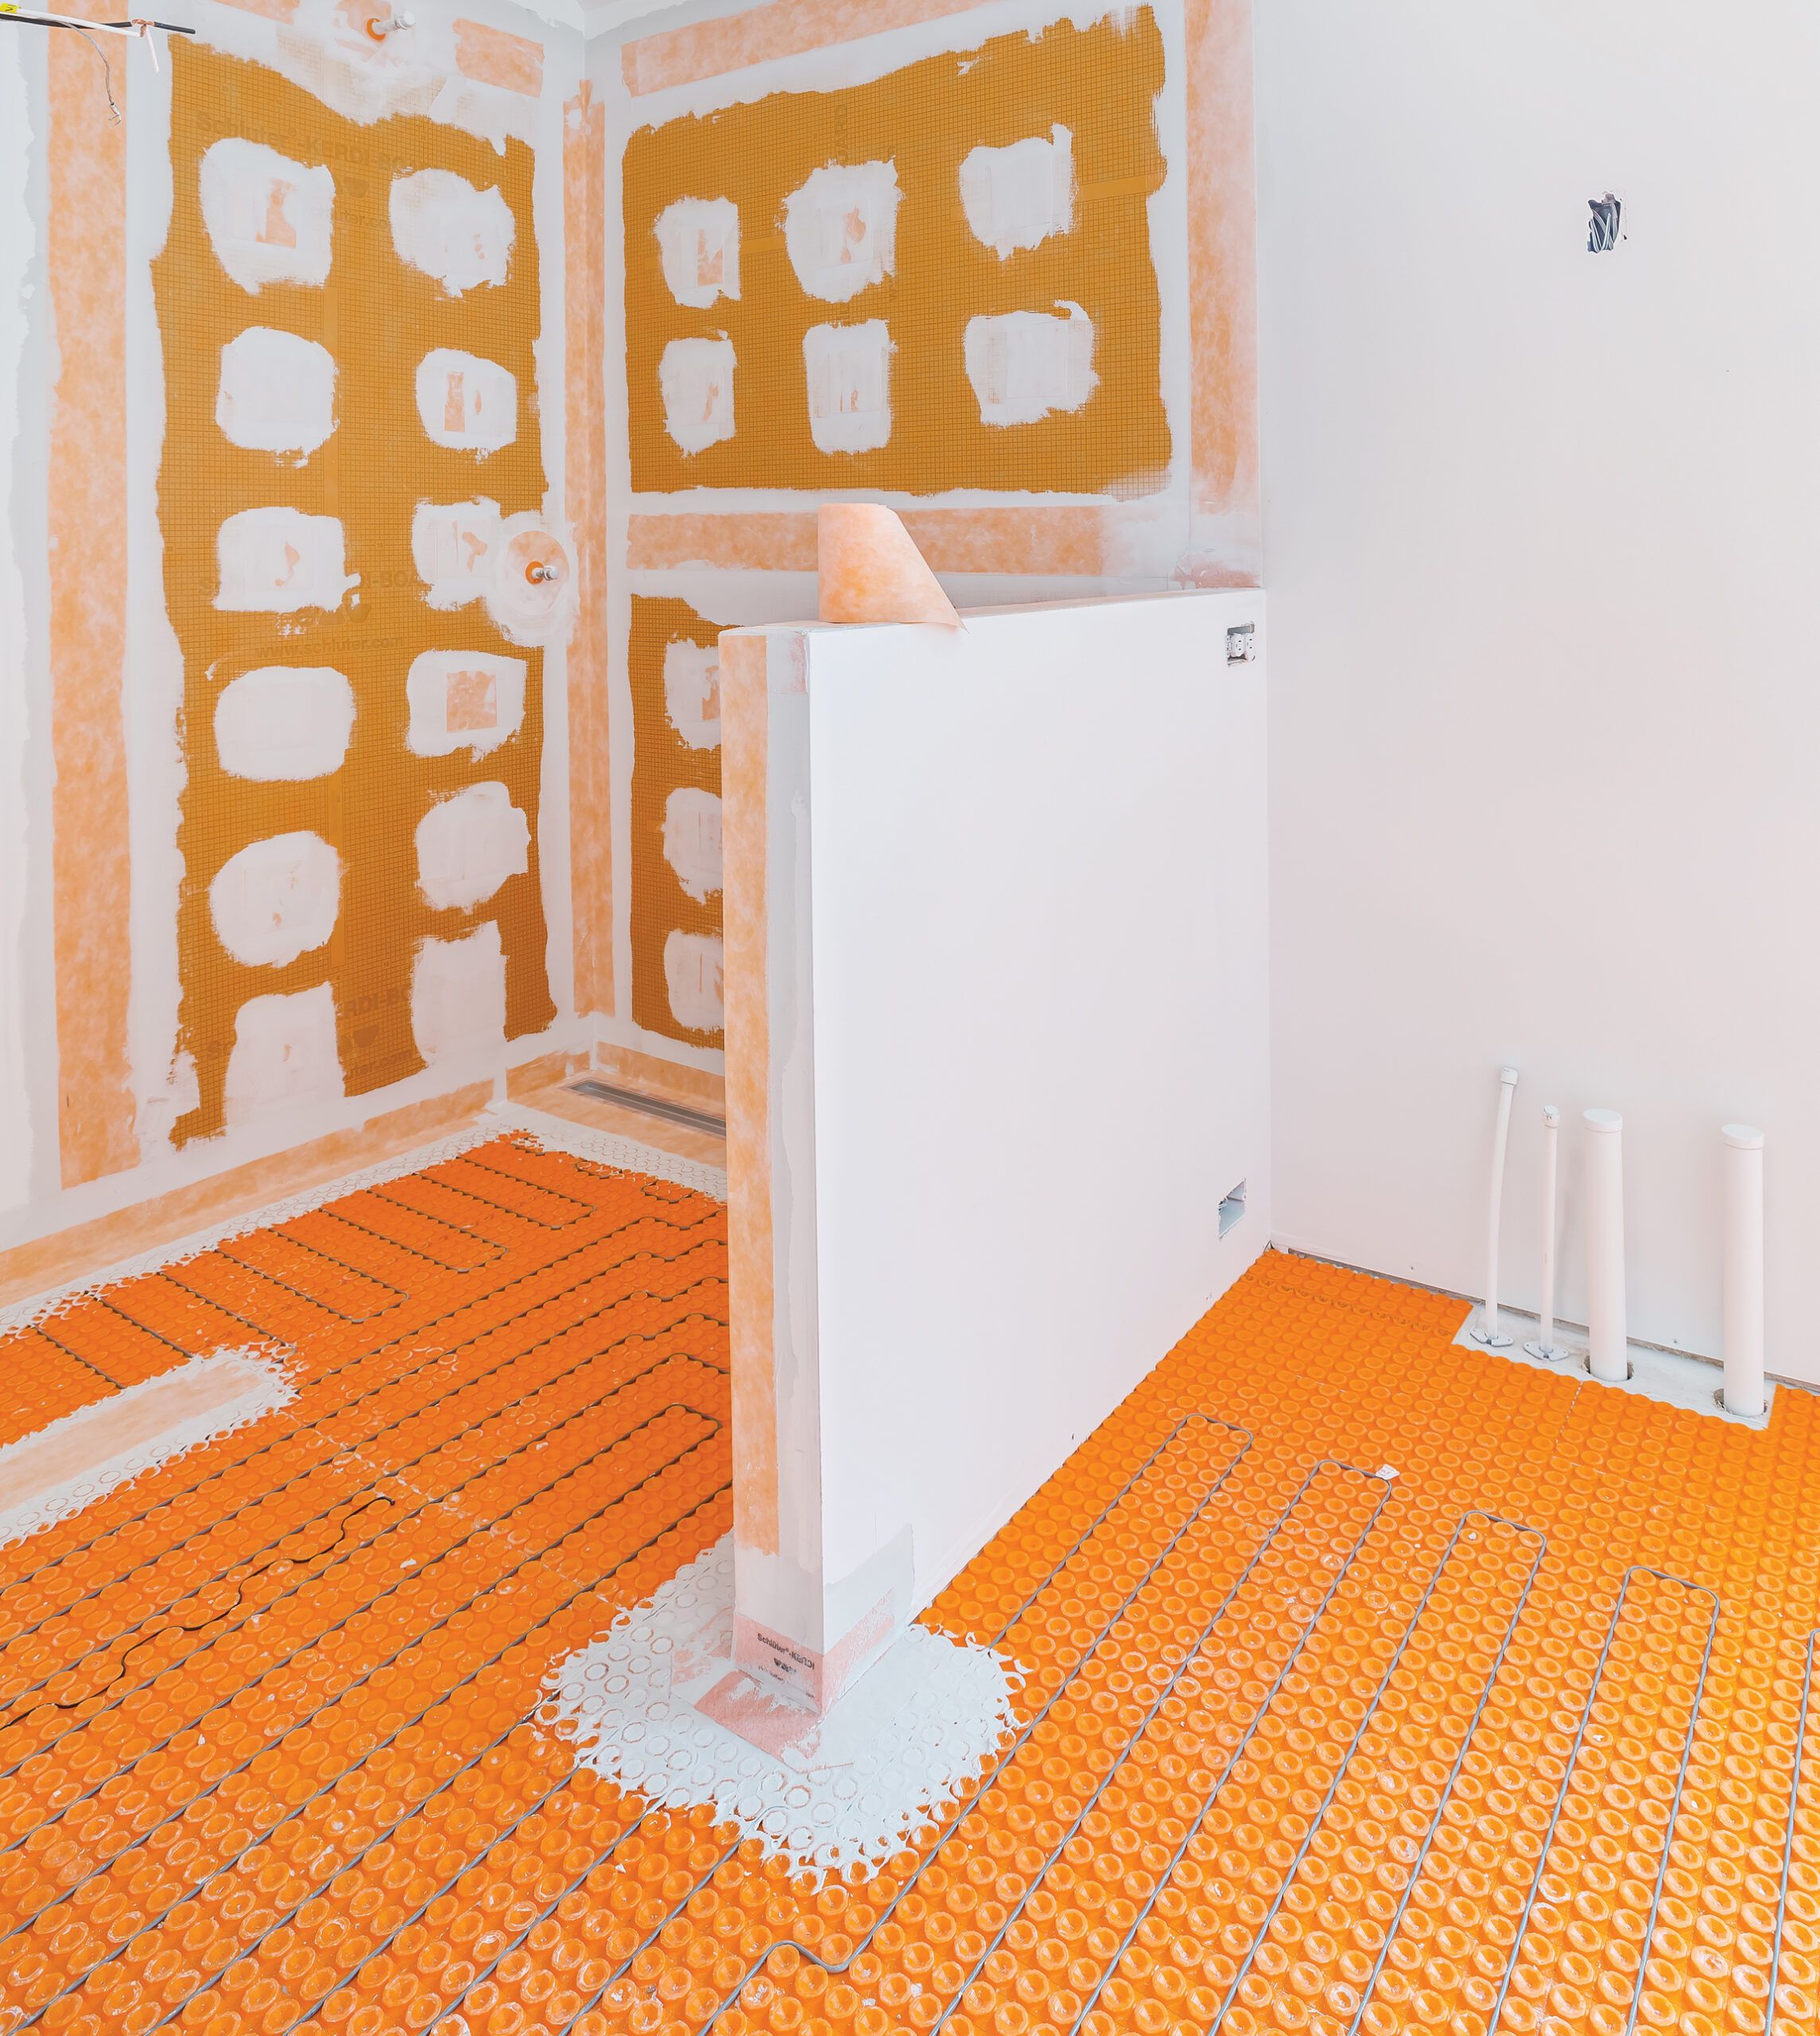 Ceramic Flooring That Can Be Installed 8 Times Faster Than Conventional  Tiling